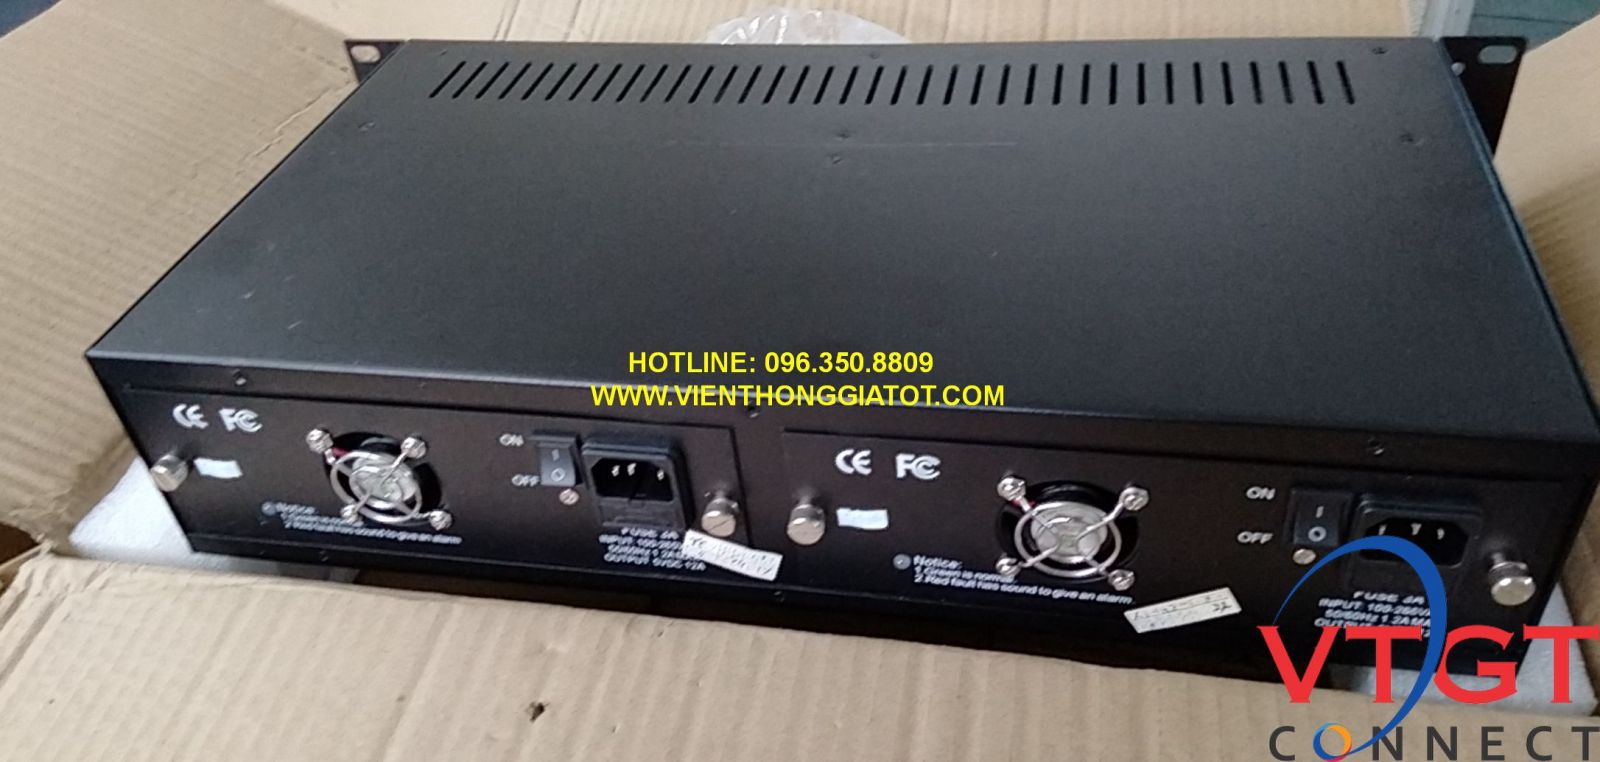 anh-khung-nguon-tap-trung-converter-14-khe-cam-holink